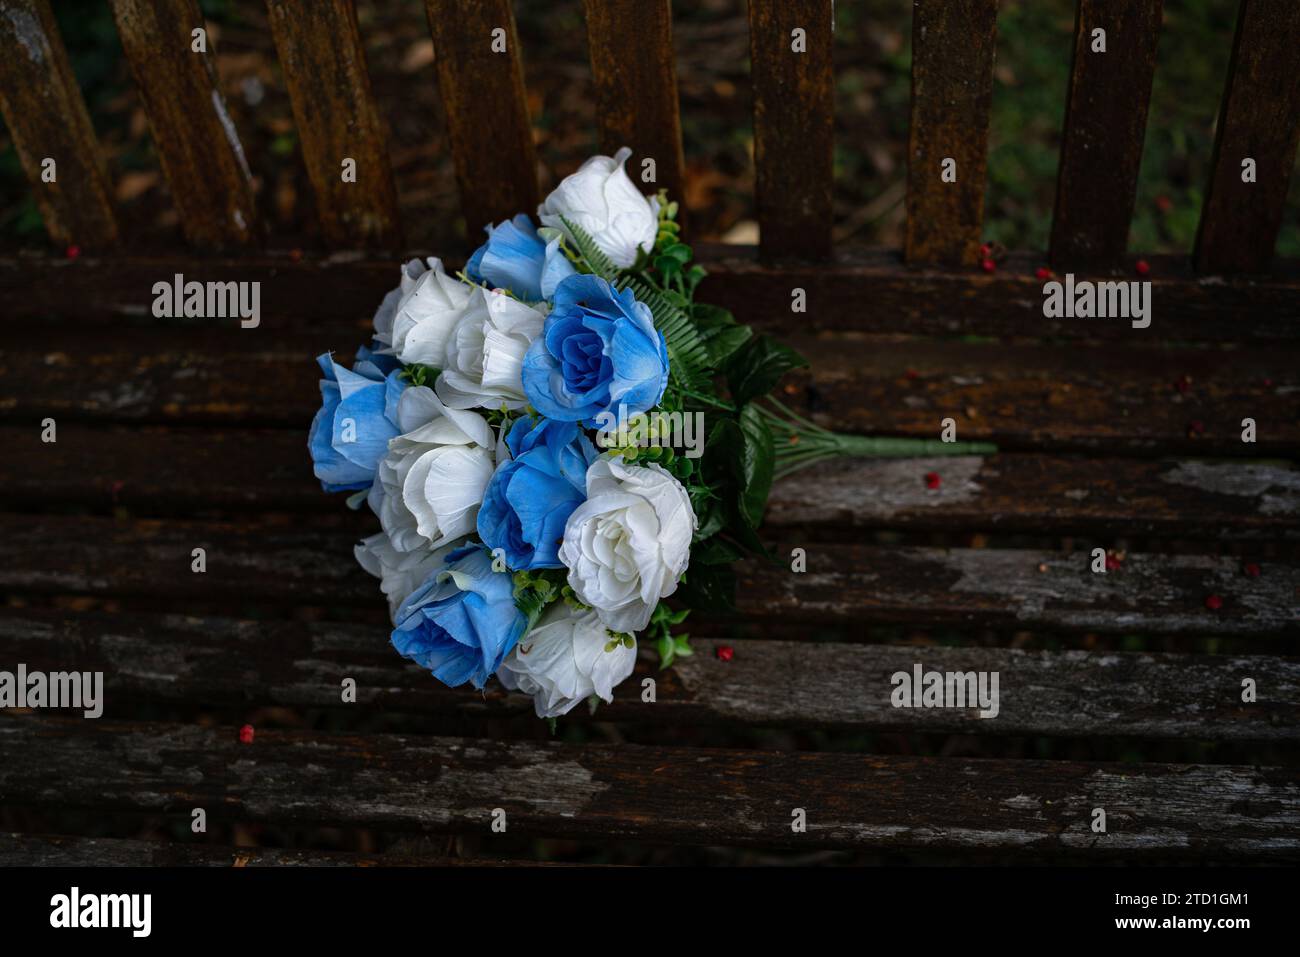 Silk flowers abandoned on a bench Stock Photo